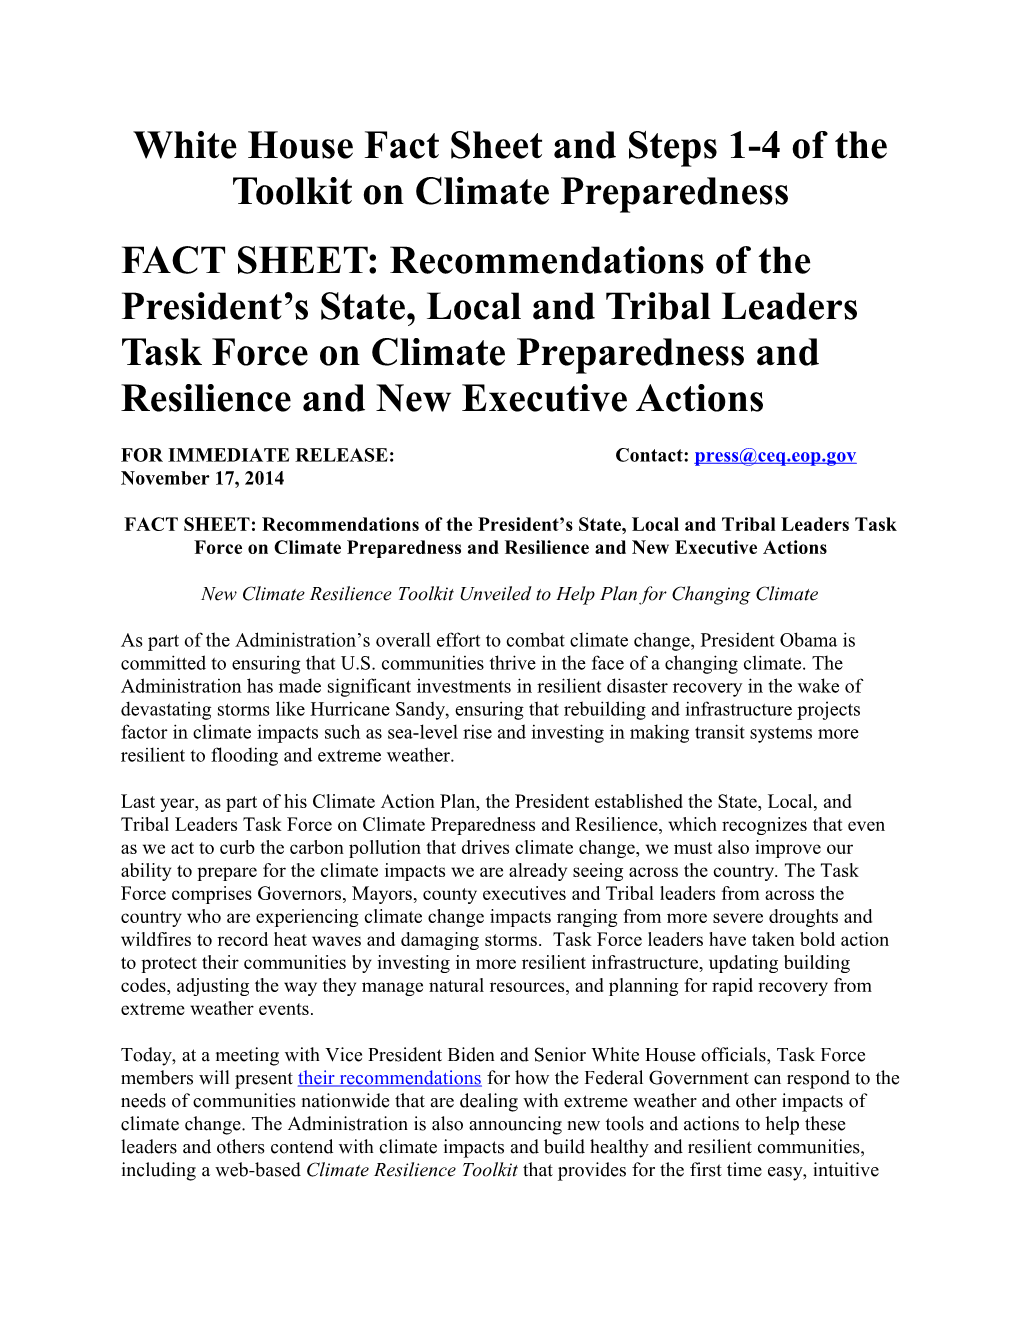 White House Fact Sheet and Steps 1-4 of the Toolkit on Climate Preparedness